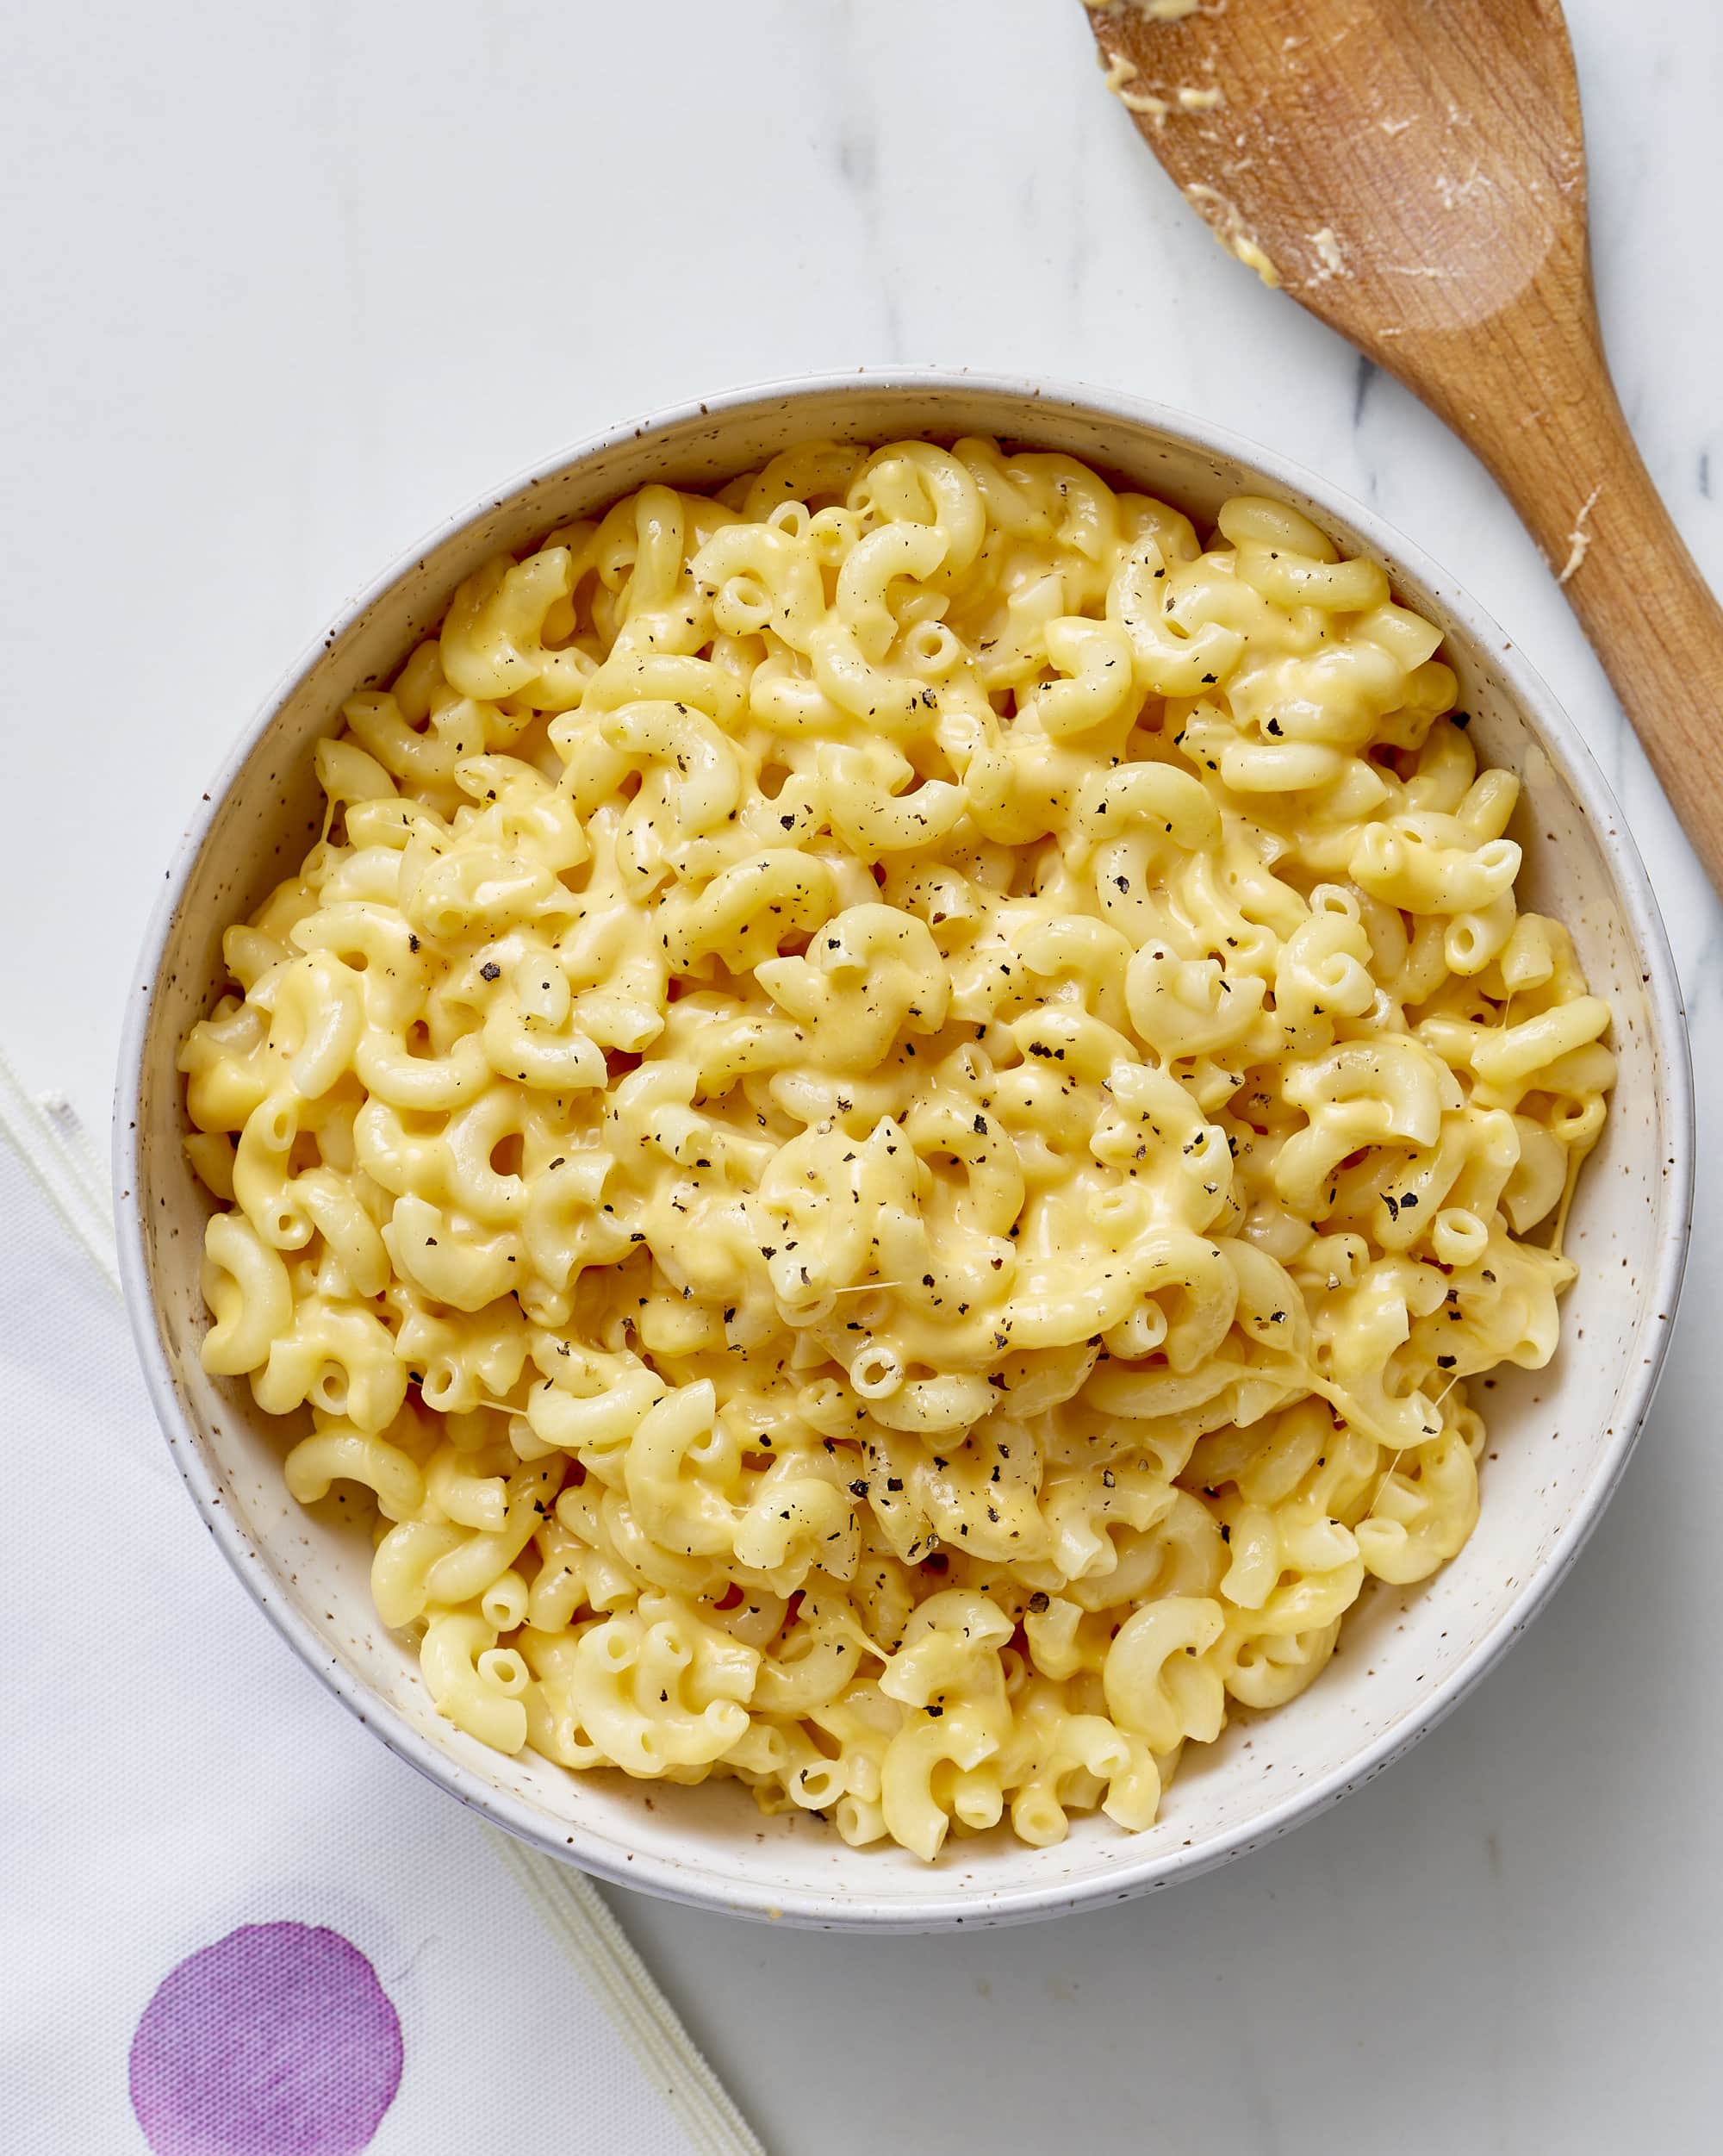 How To Make Mac And Cheese